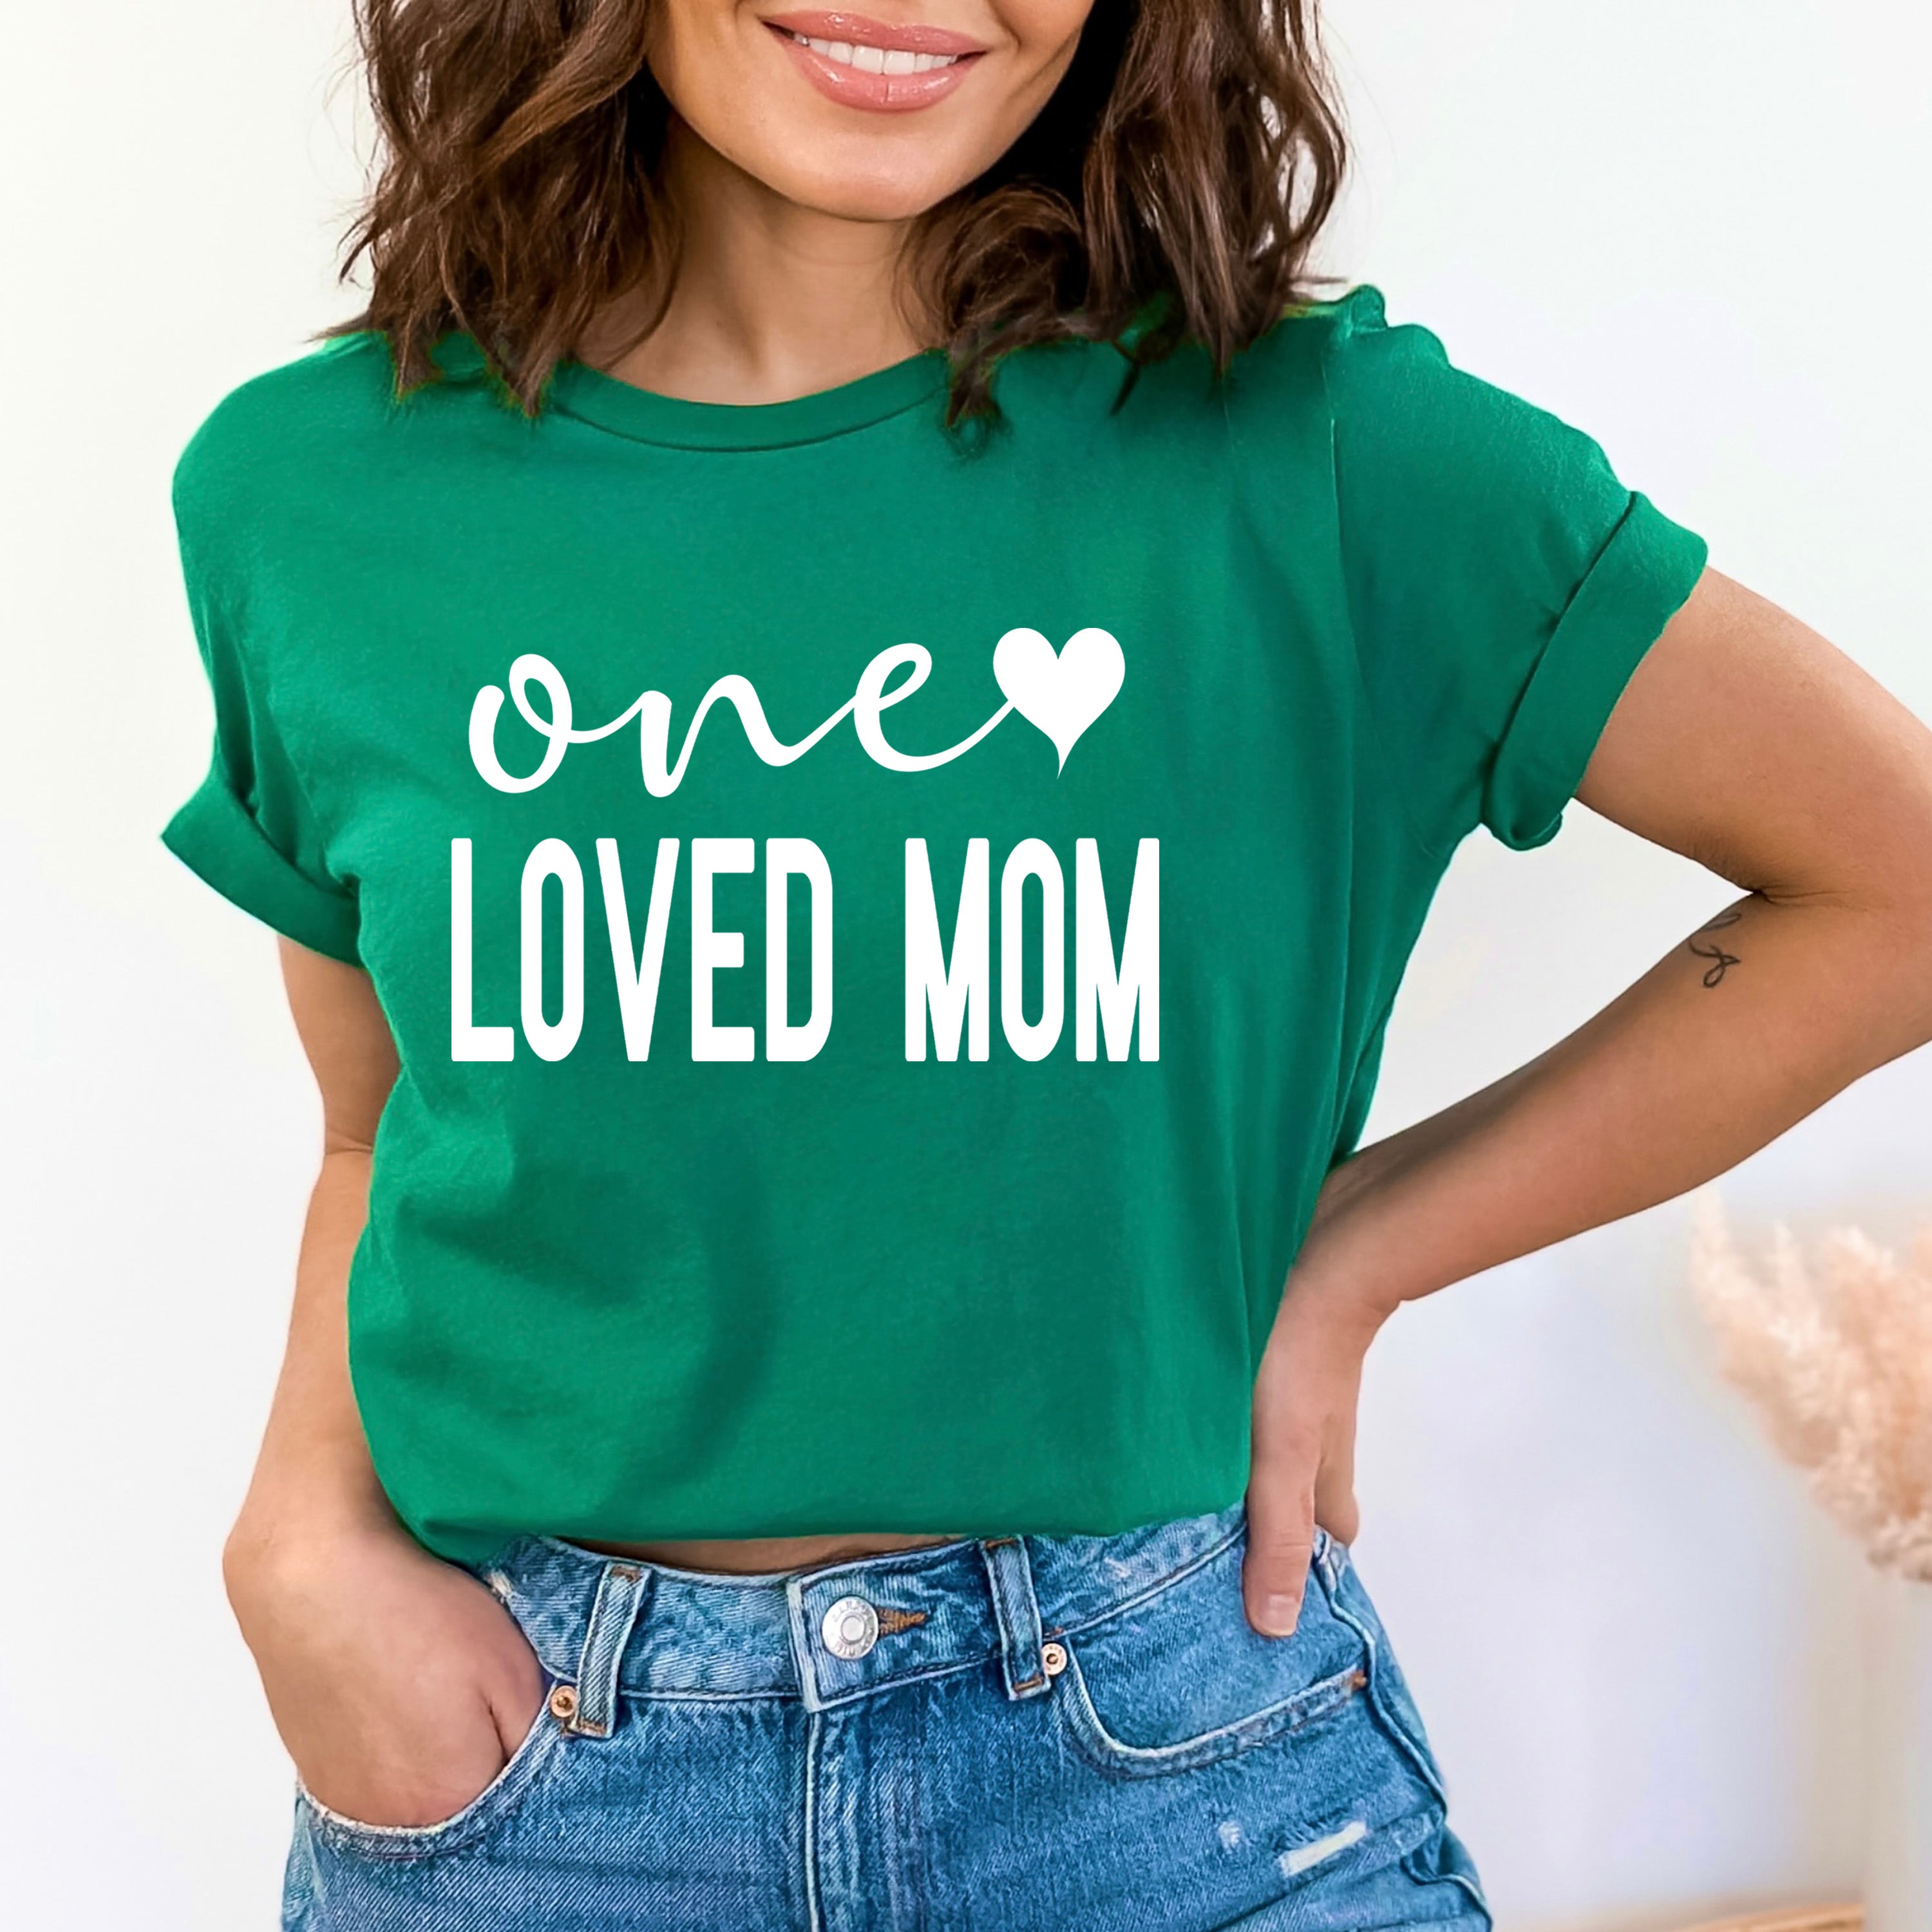 One Loved Mom - Bella canvas